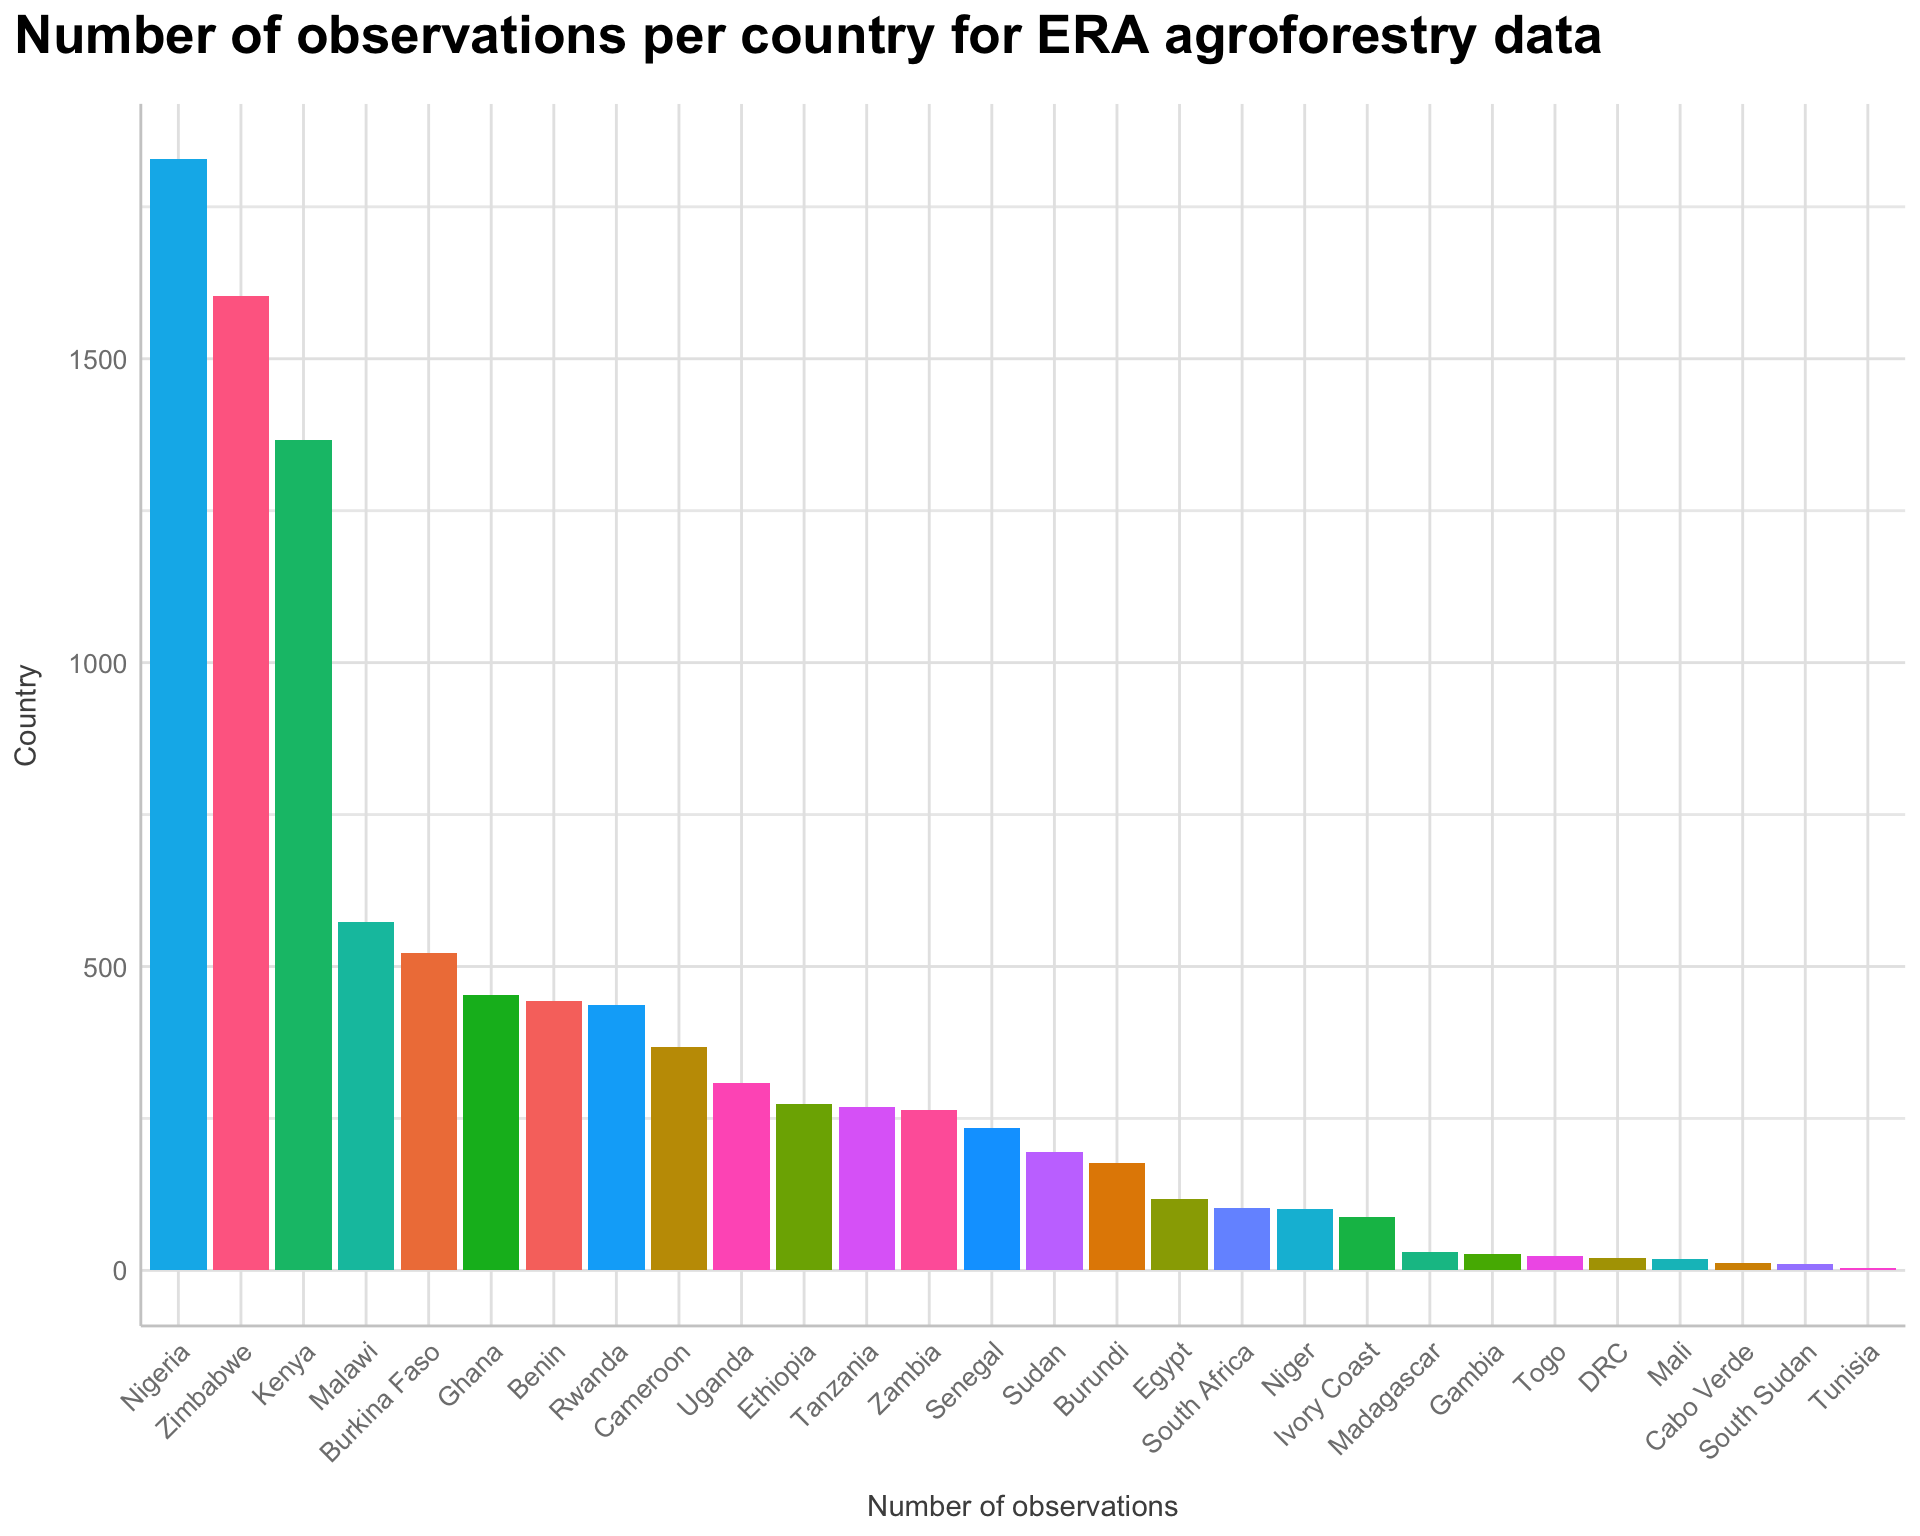 countries and their respected proportional contribution to the ERA agroforestry data